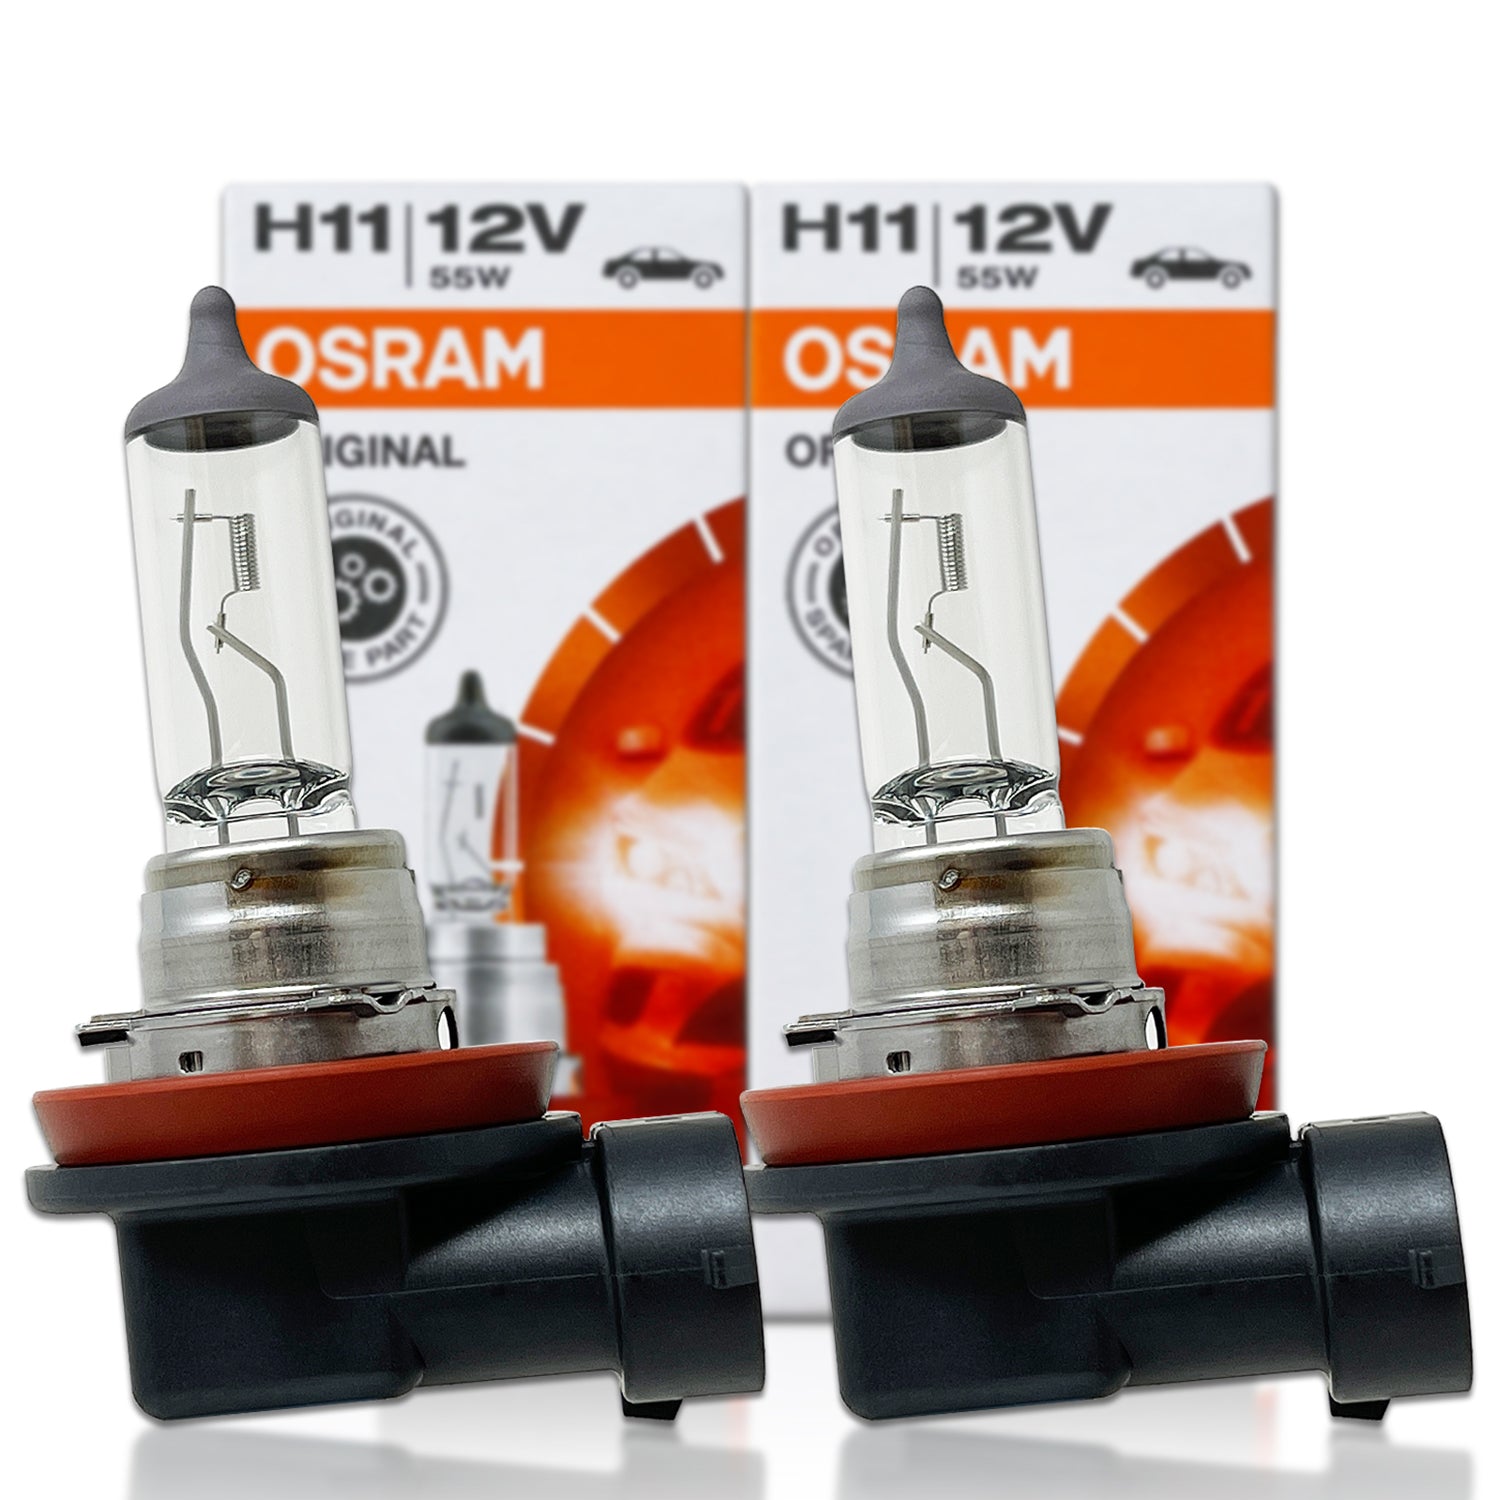 OSRAM Cool Blue Intense H1 +100% (NEXT GEN) Extra White (LED look